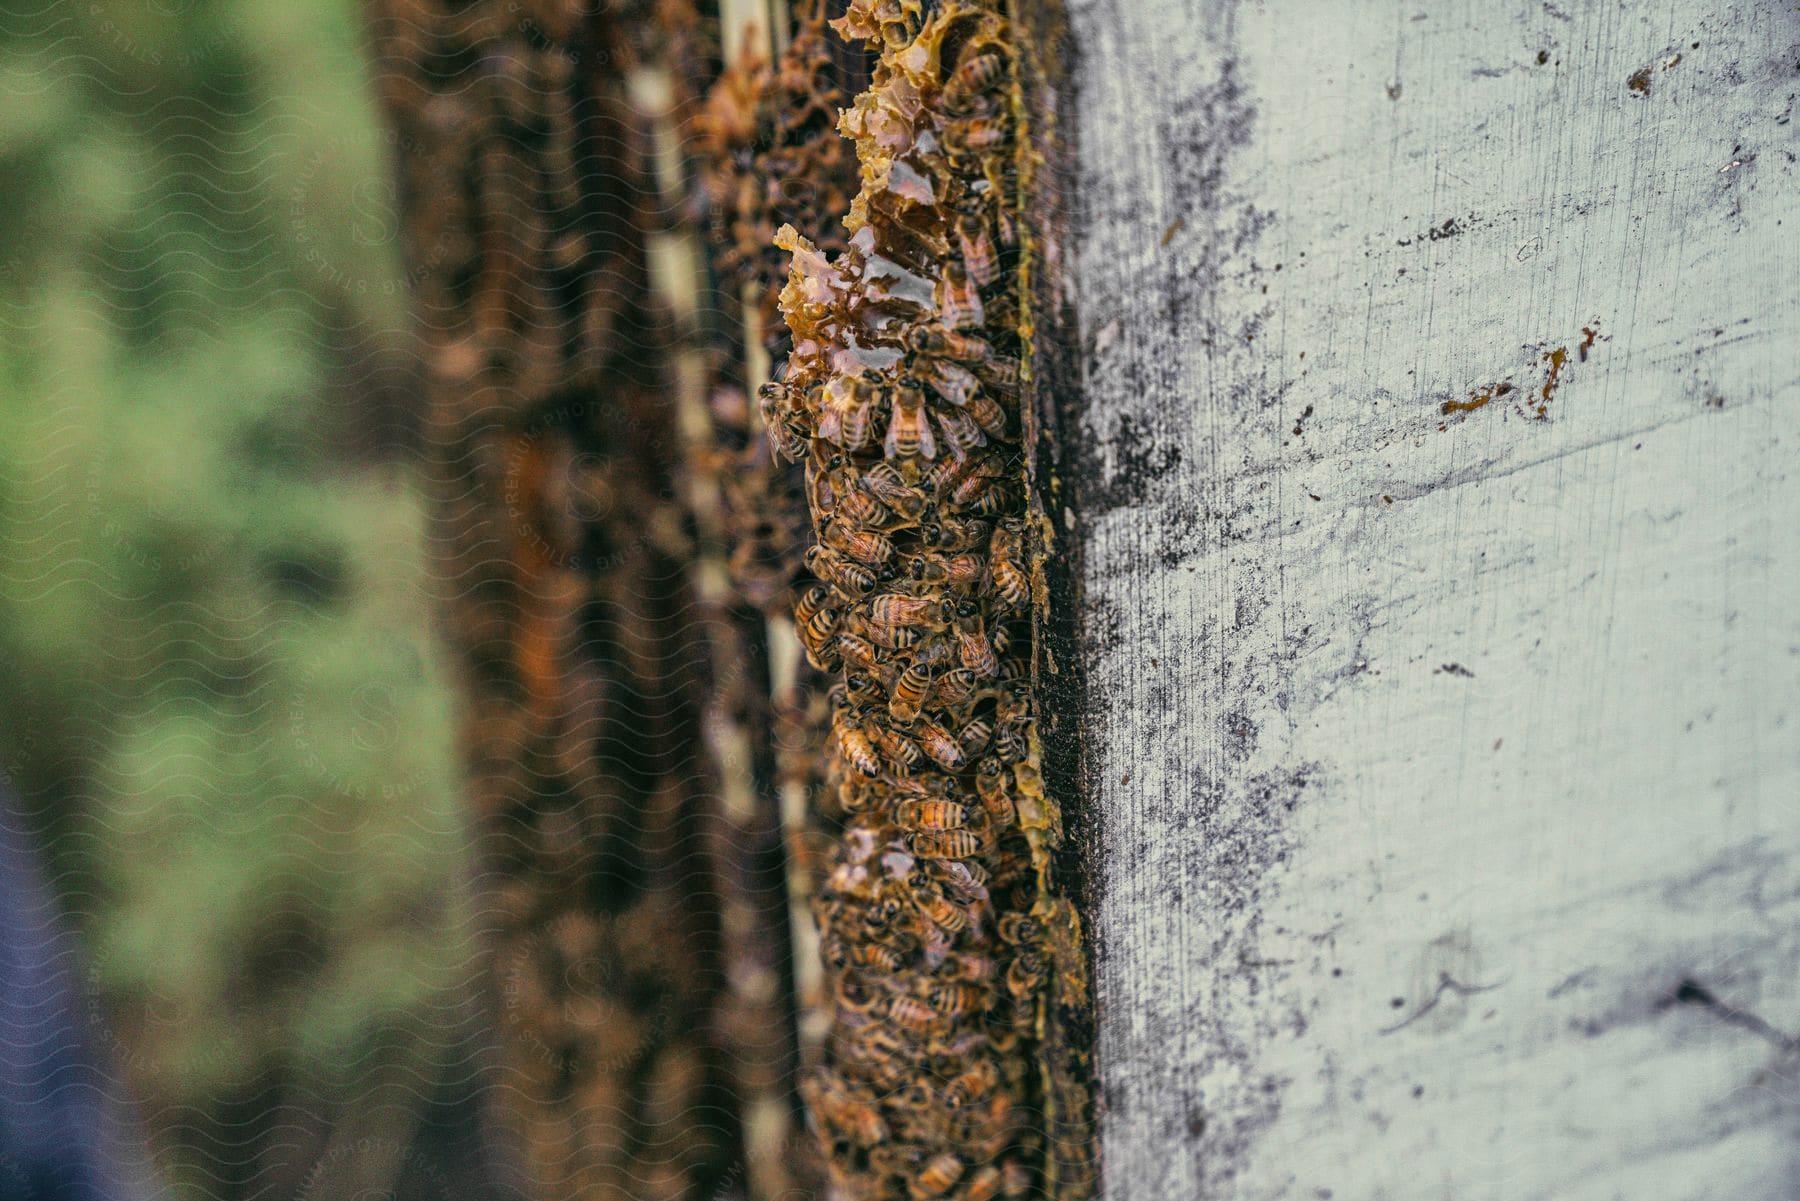 Bees clustering on the edge of a wooden beehive.